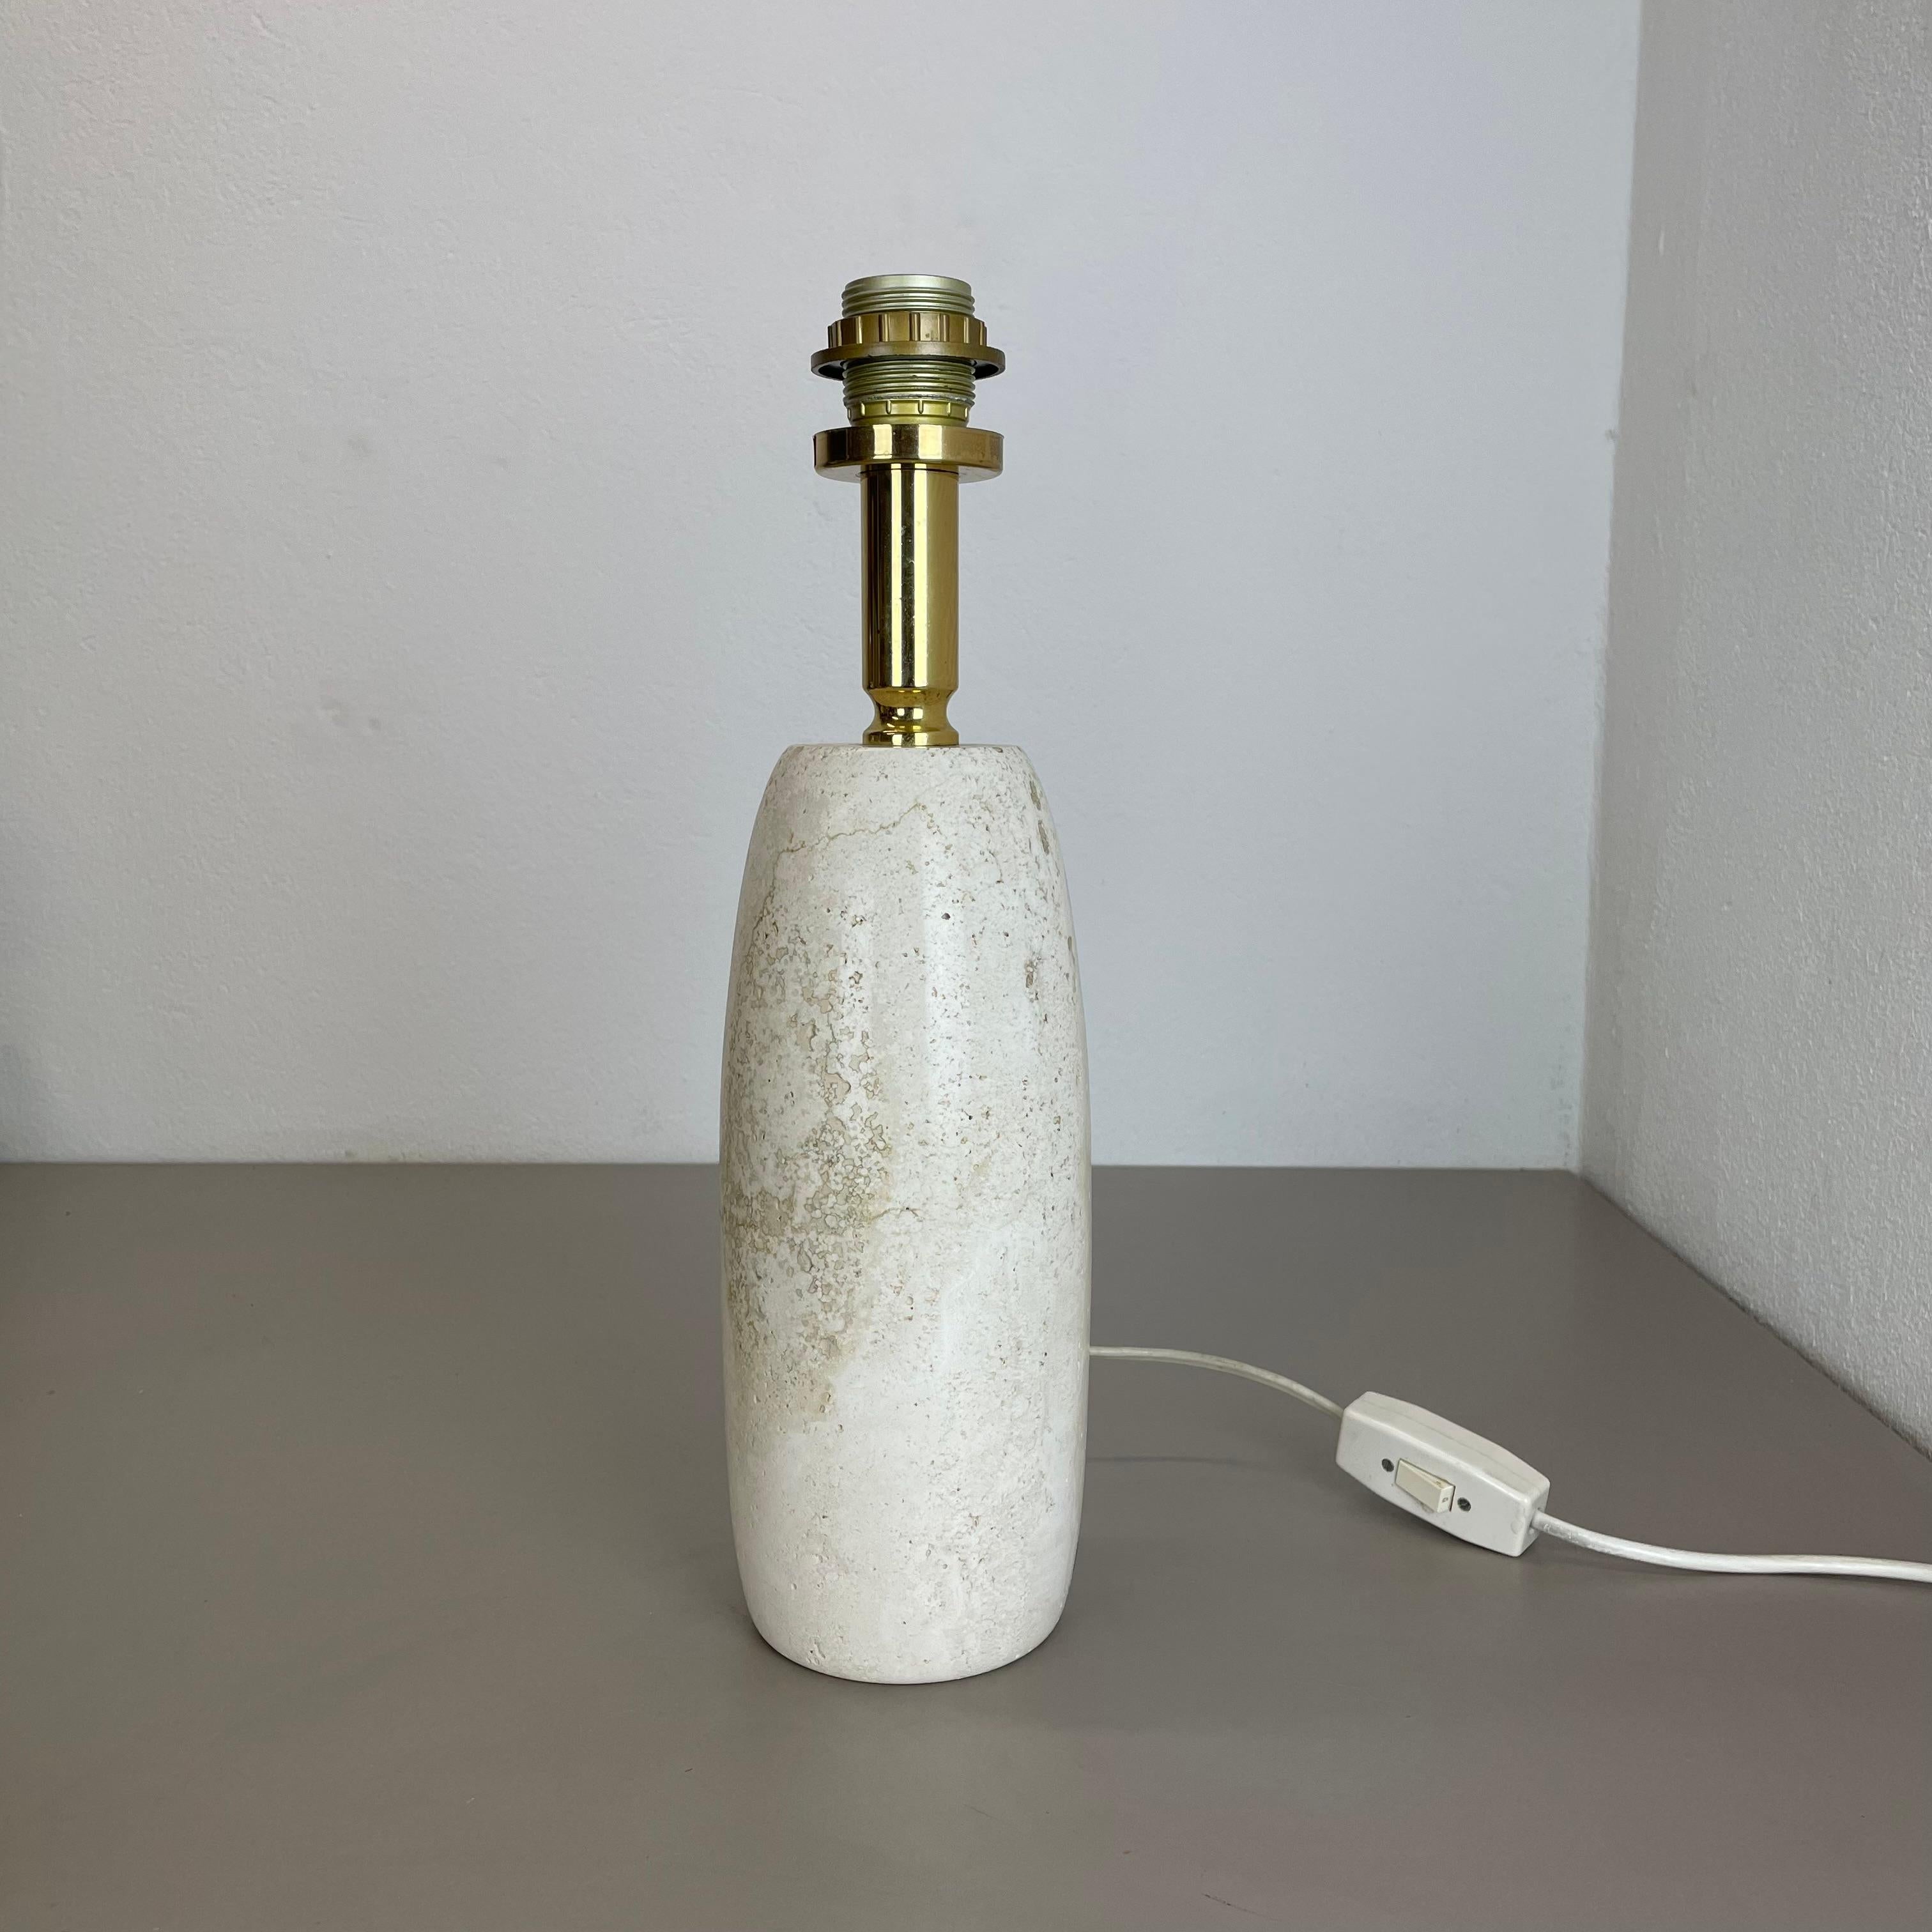 6.4kg Travertine Marble Fratelli Mannelli Style Table Light Base, Italy, 1970s For Sale 1